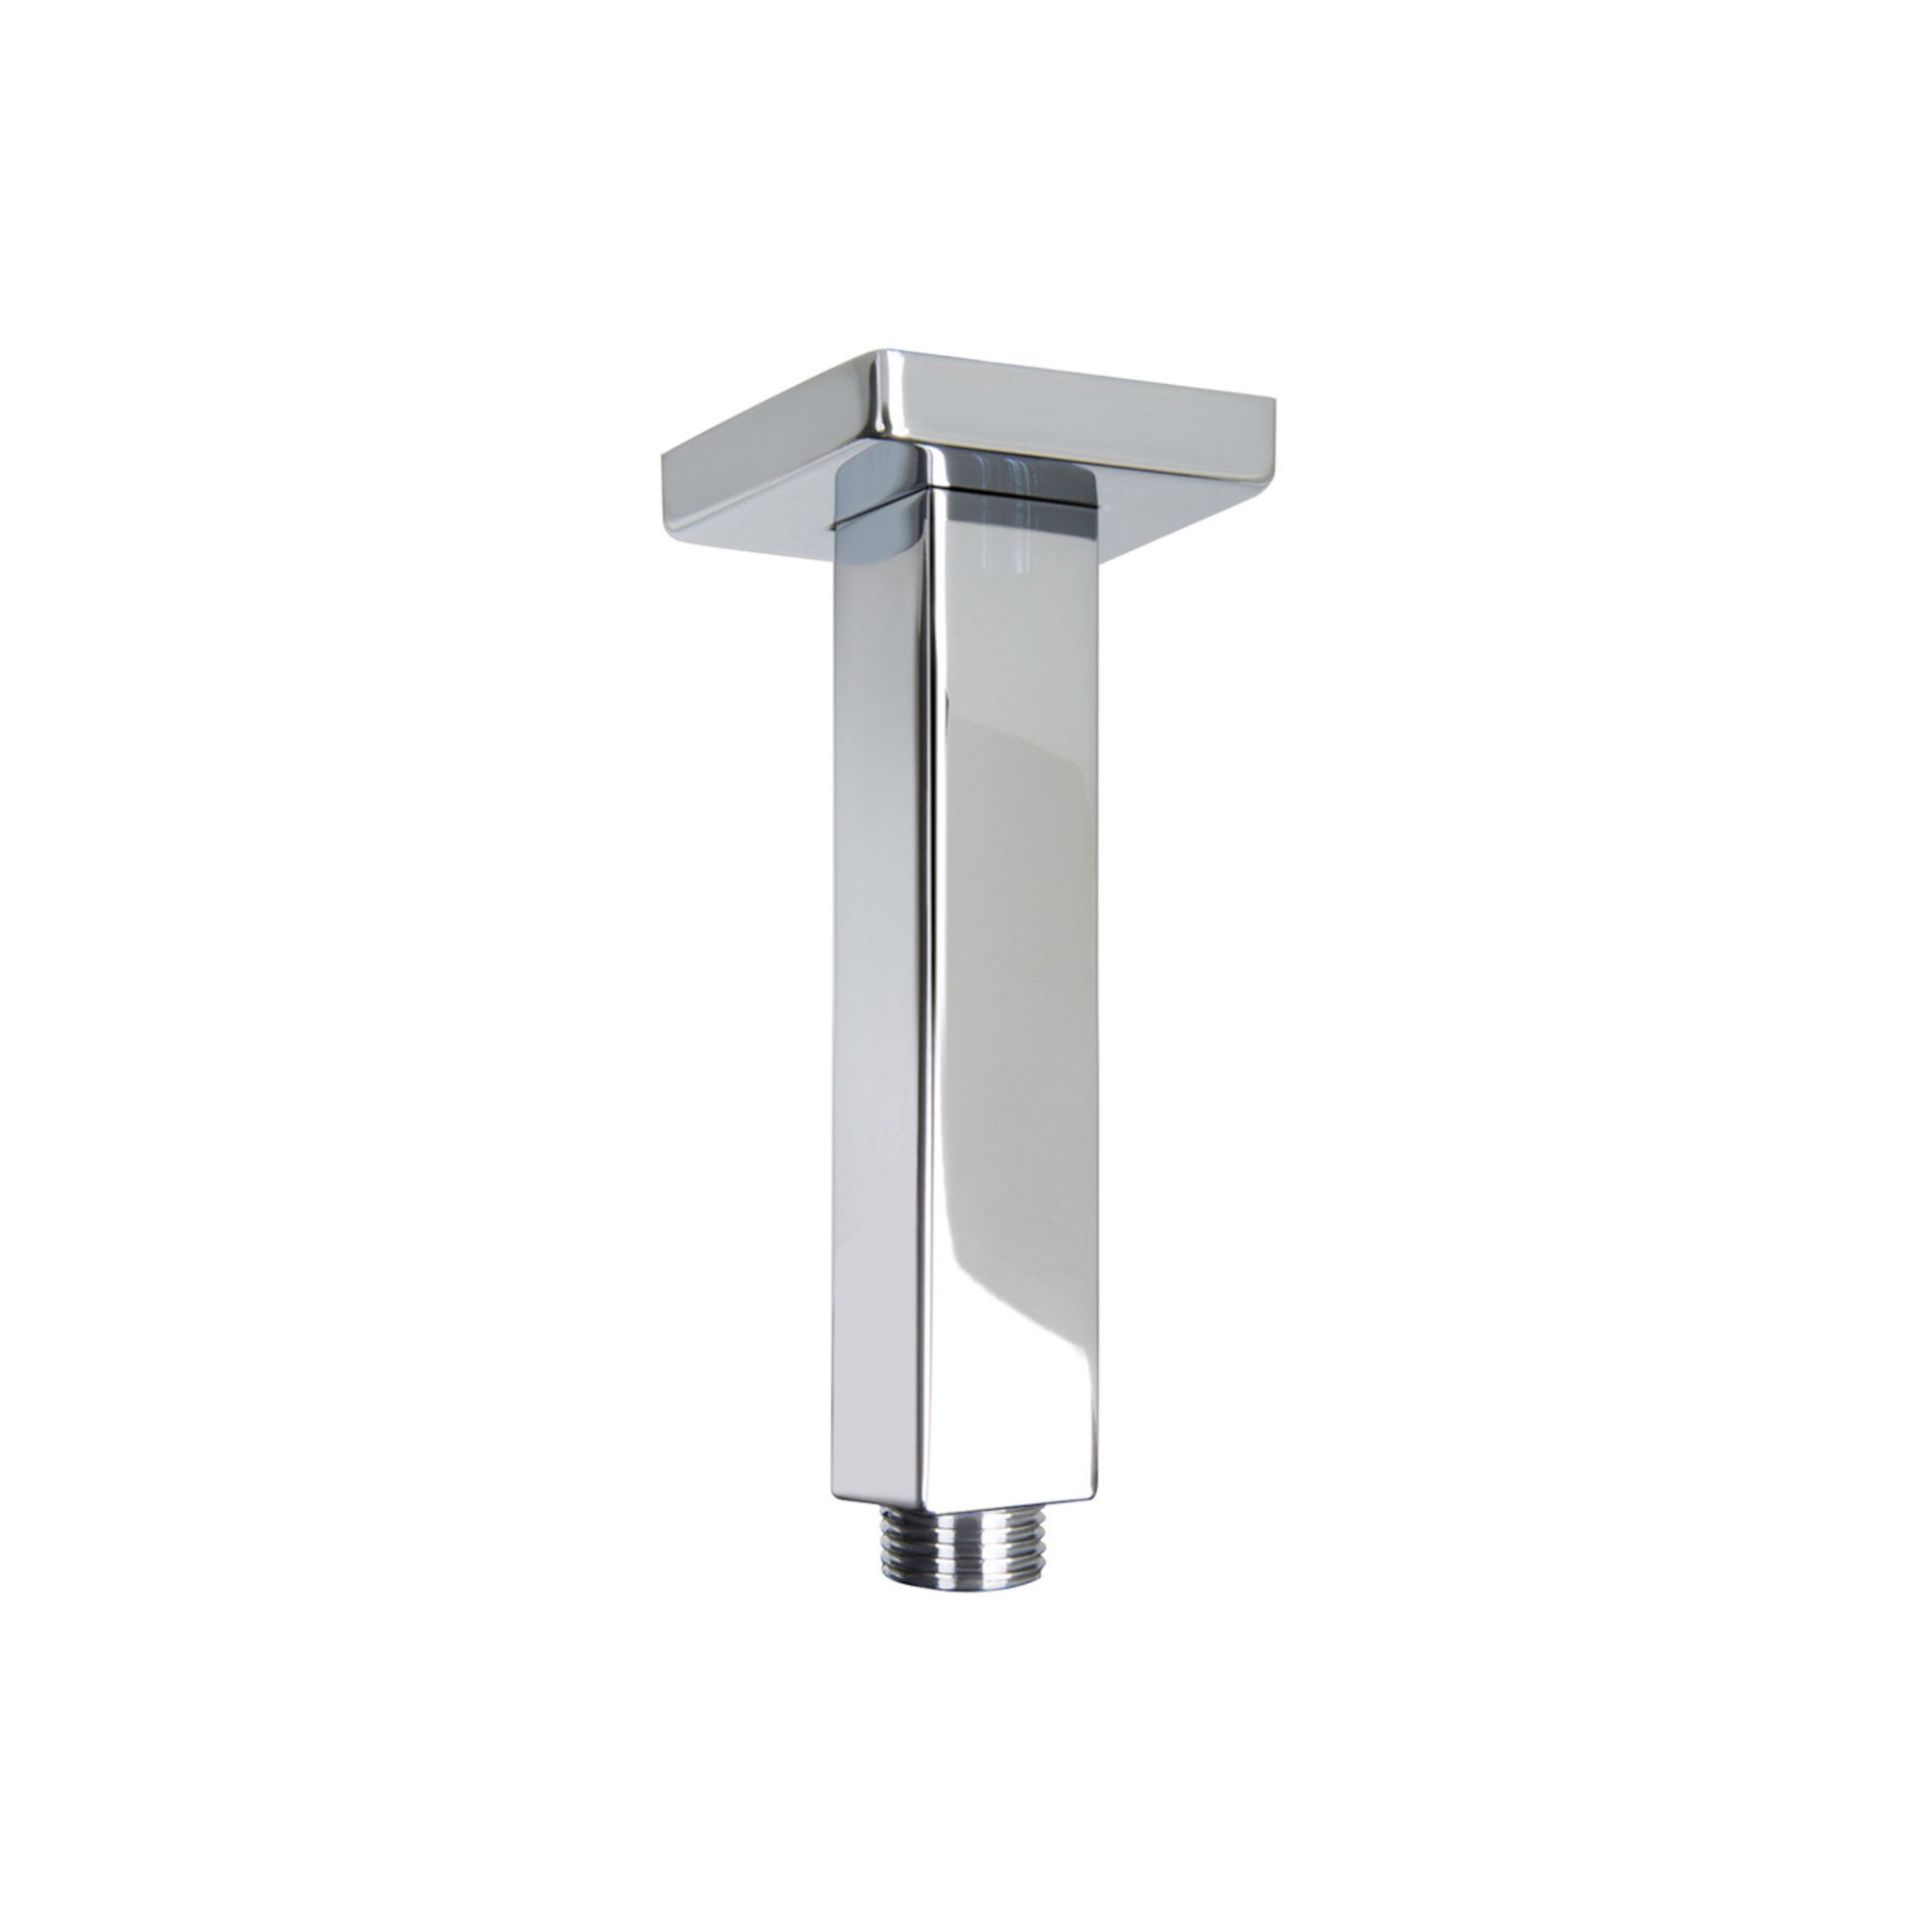 (QT1013) Shower arm Ceiling Mount Square Stainless Steel Chrome - 15 cm. Chrome-plated solid br...